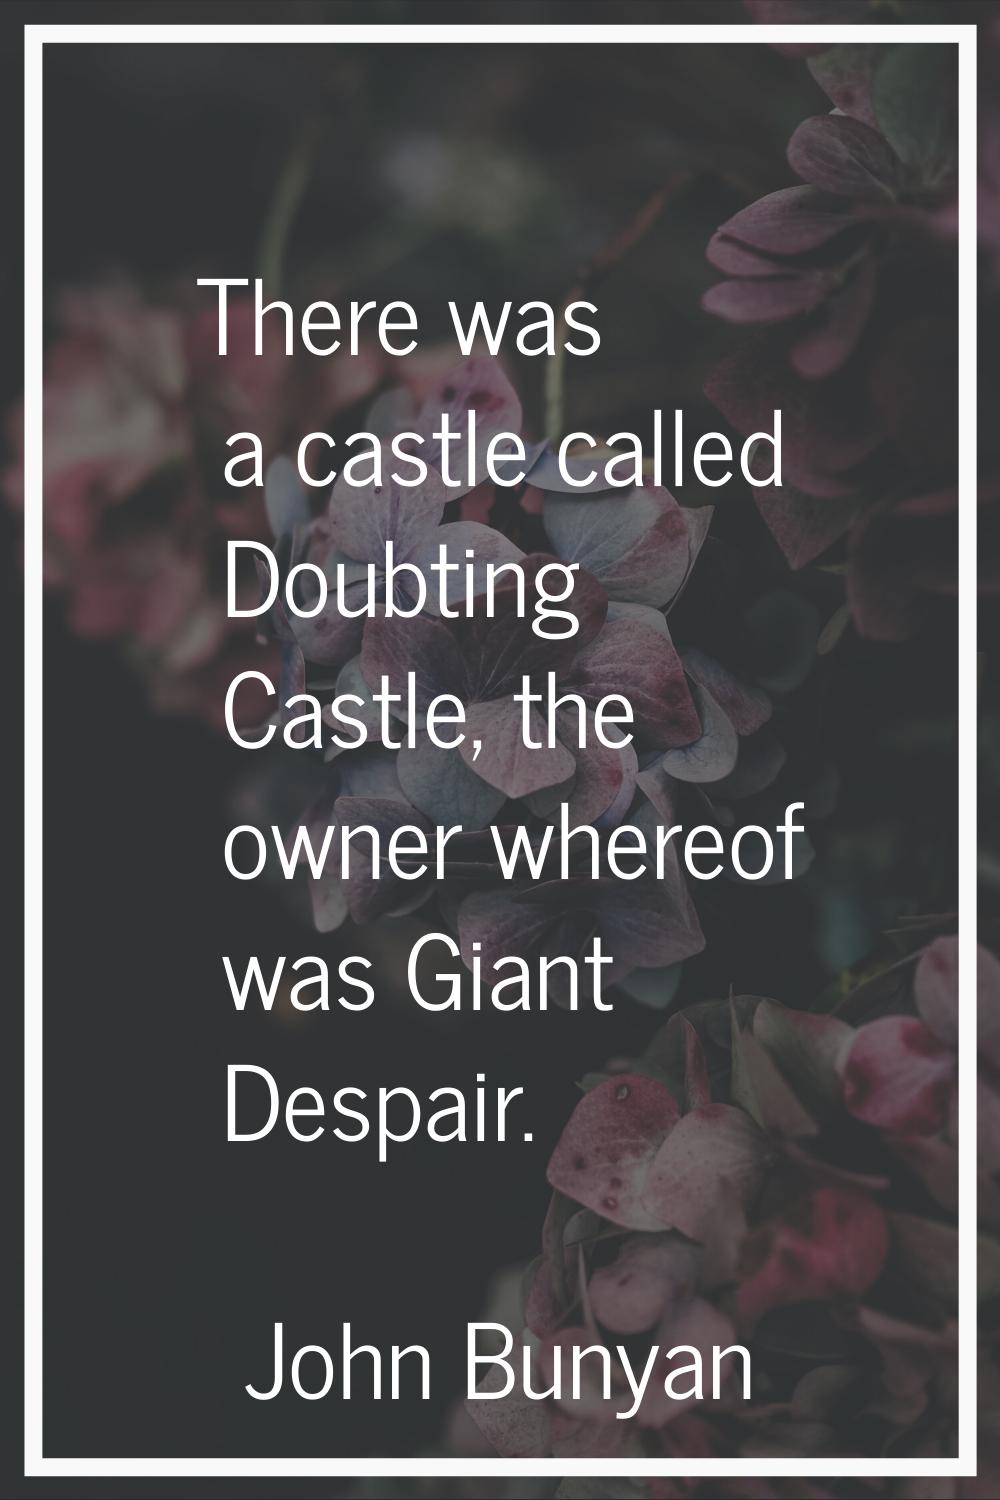 There was a castle called Doubting Castle, the owner whereof was Giant Despair.